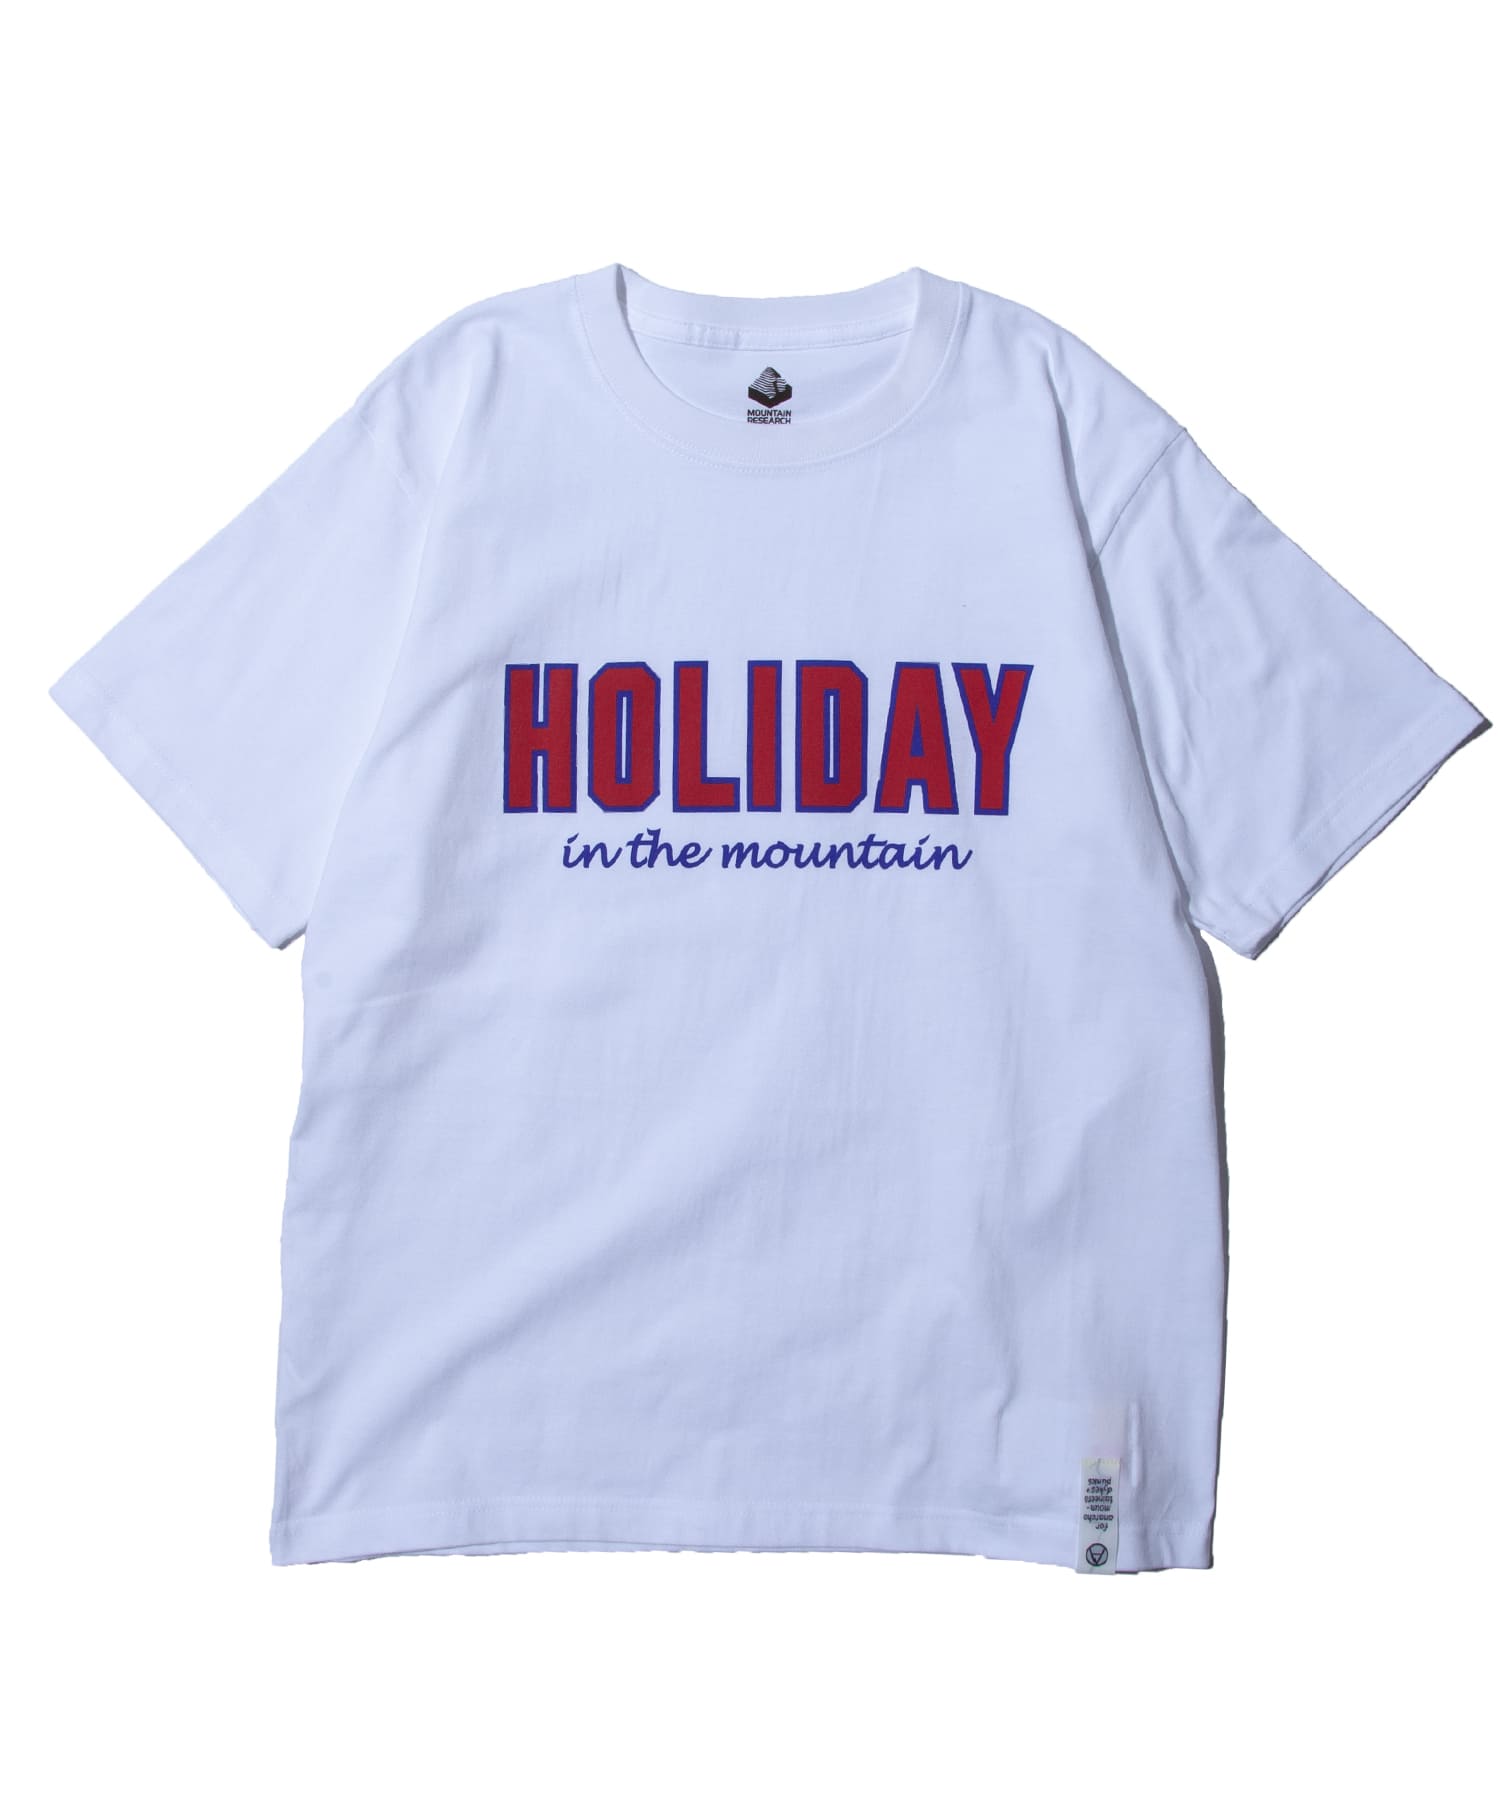 MOUNTAIN RESEARCH HOLIDAY T-SHIRTS / マウンテンリサーチ ホリデイT 